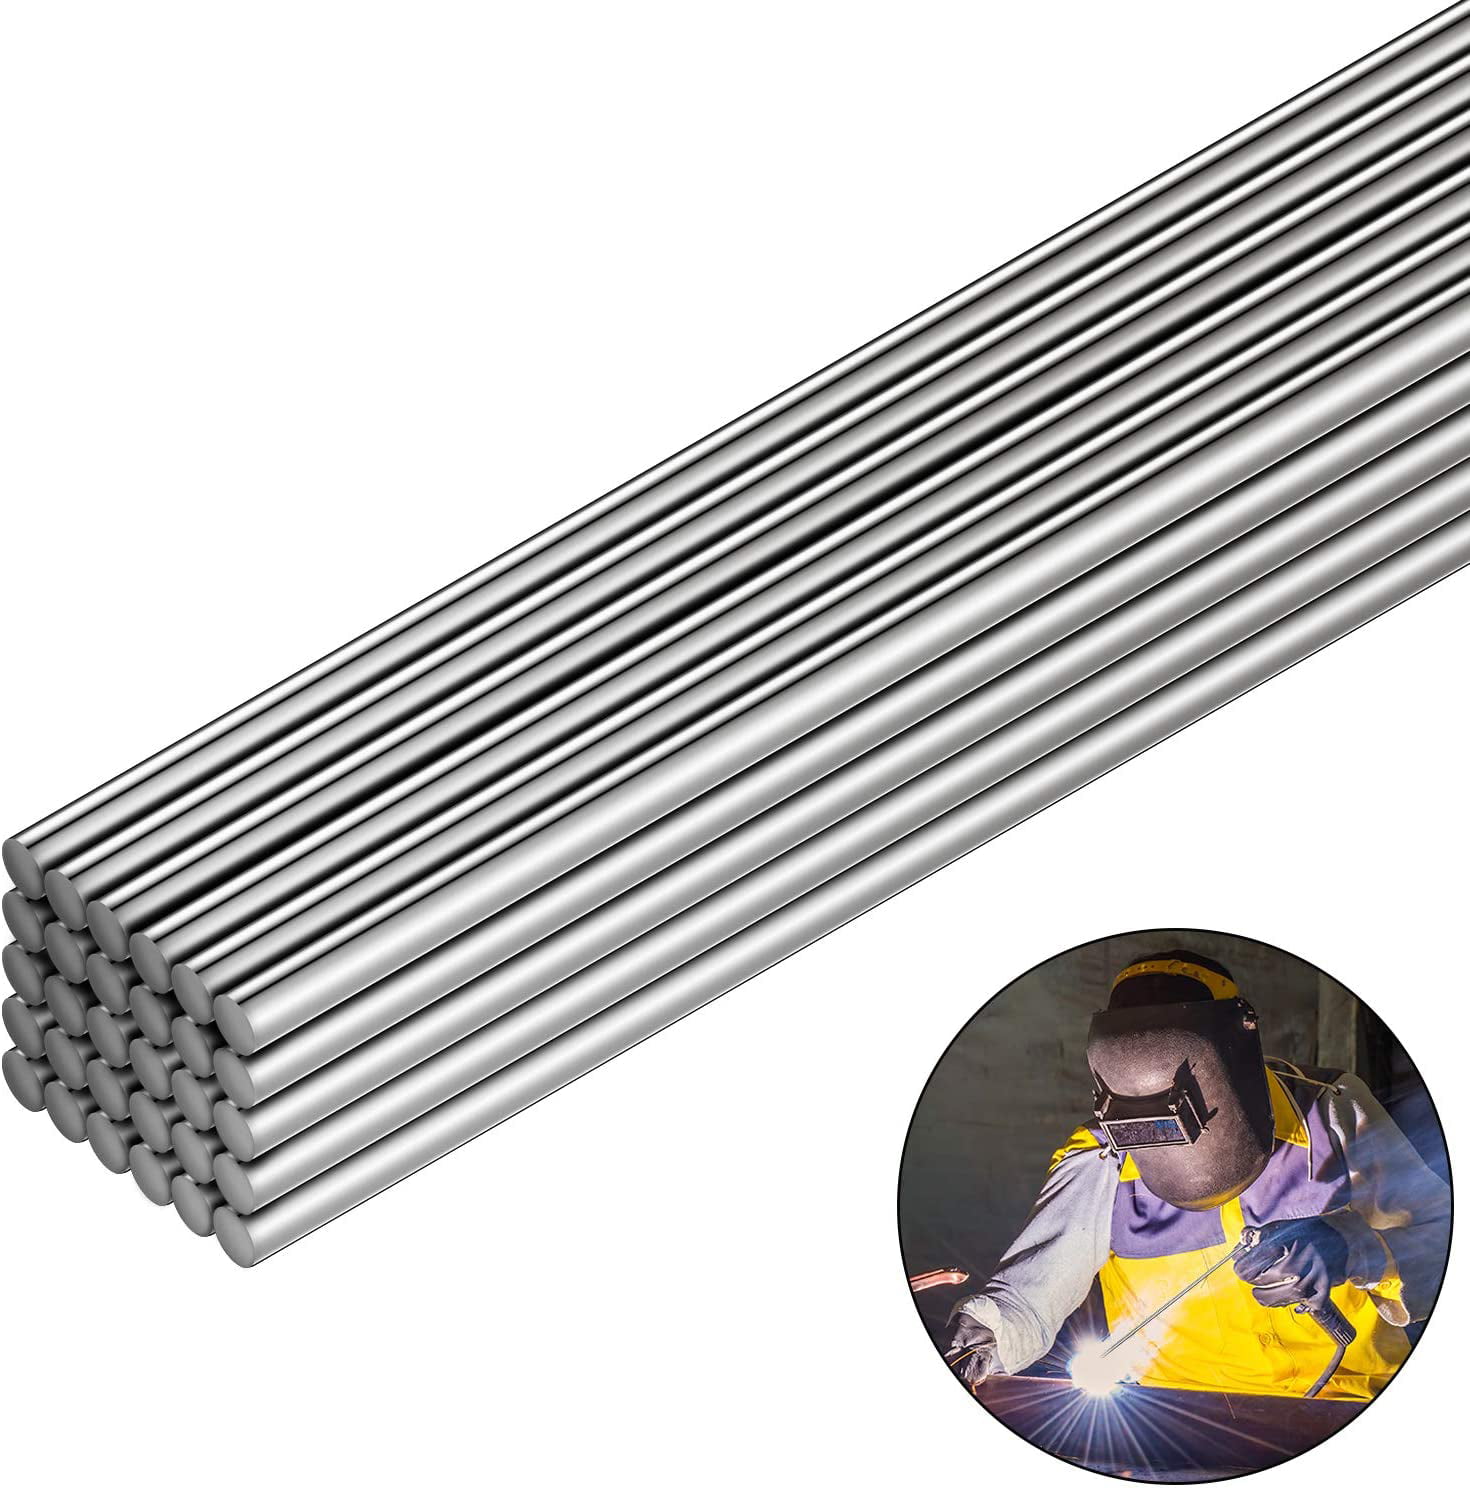 Easy Melt Welding Rods Low Temperature Aluminum Wire Brazing Silver 10/20/50pcs 